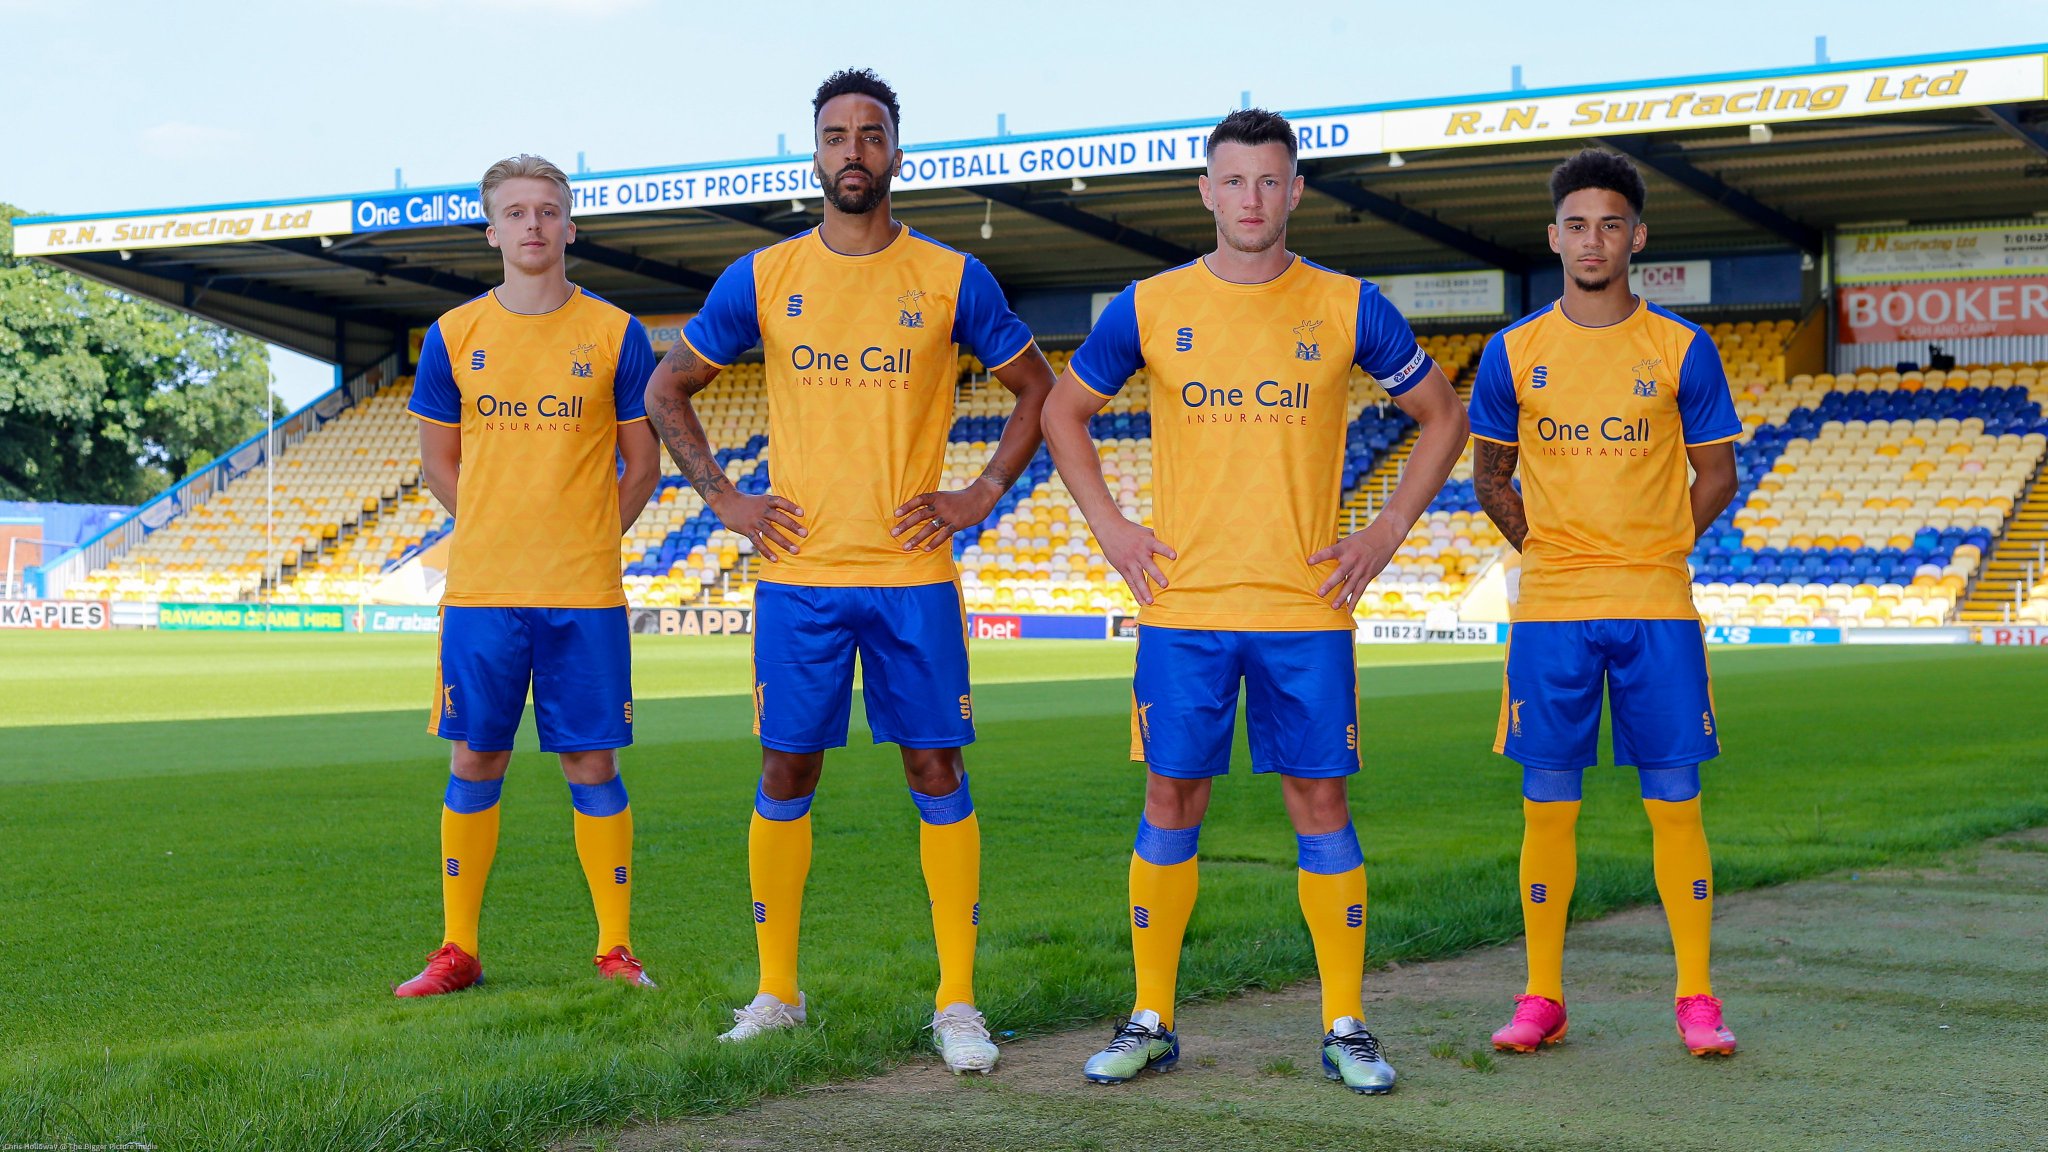 Mansfield Town F.C. Wallpapers